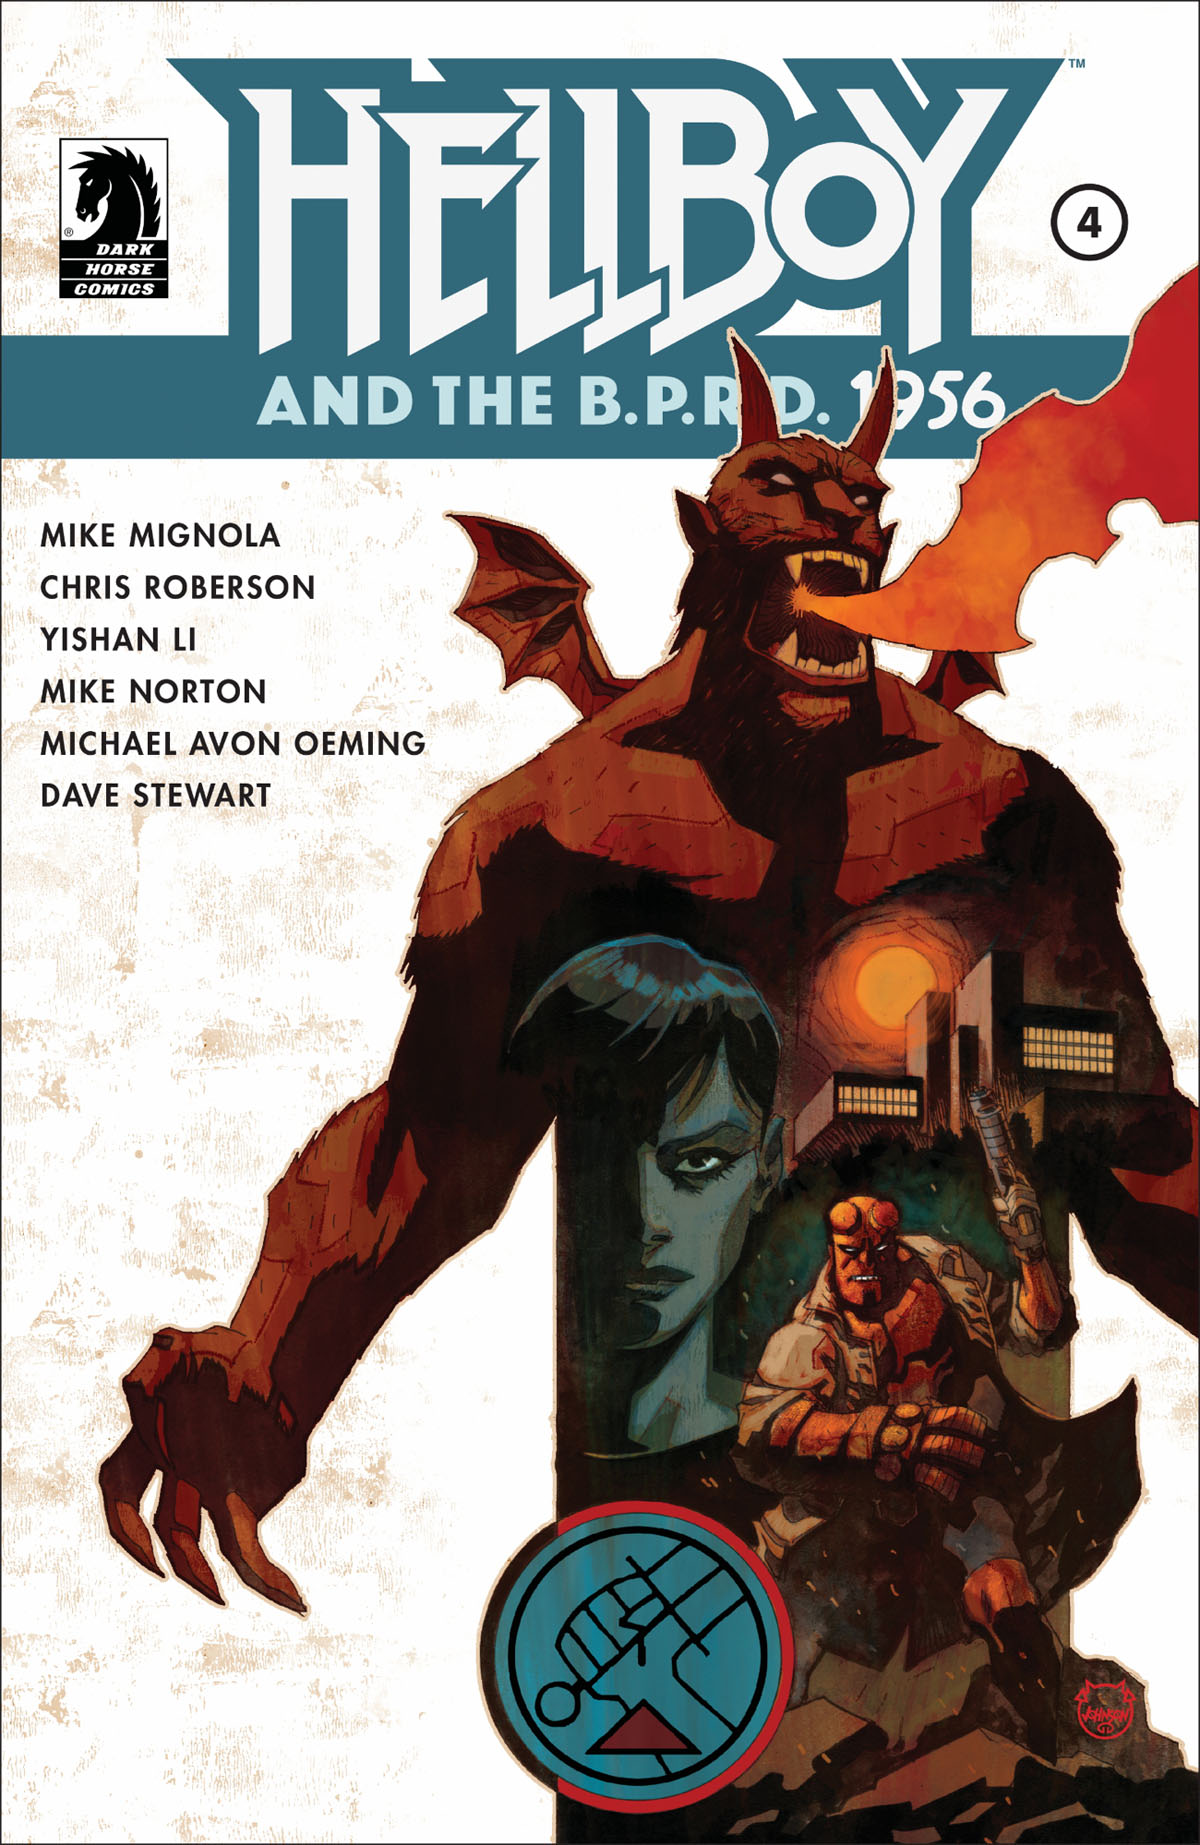 Hellboy and the BPRD 1956 #4 cover